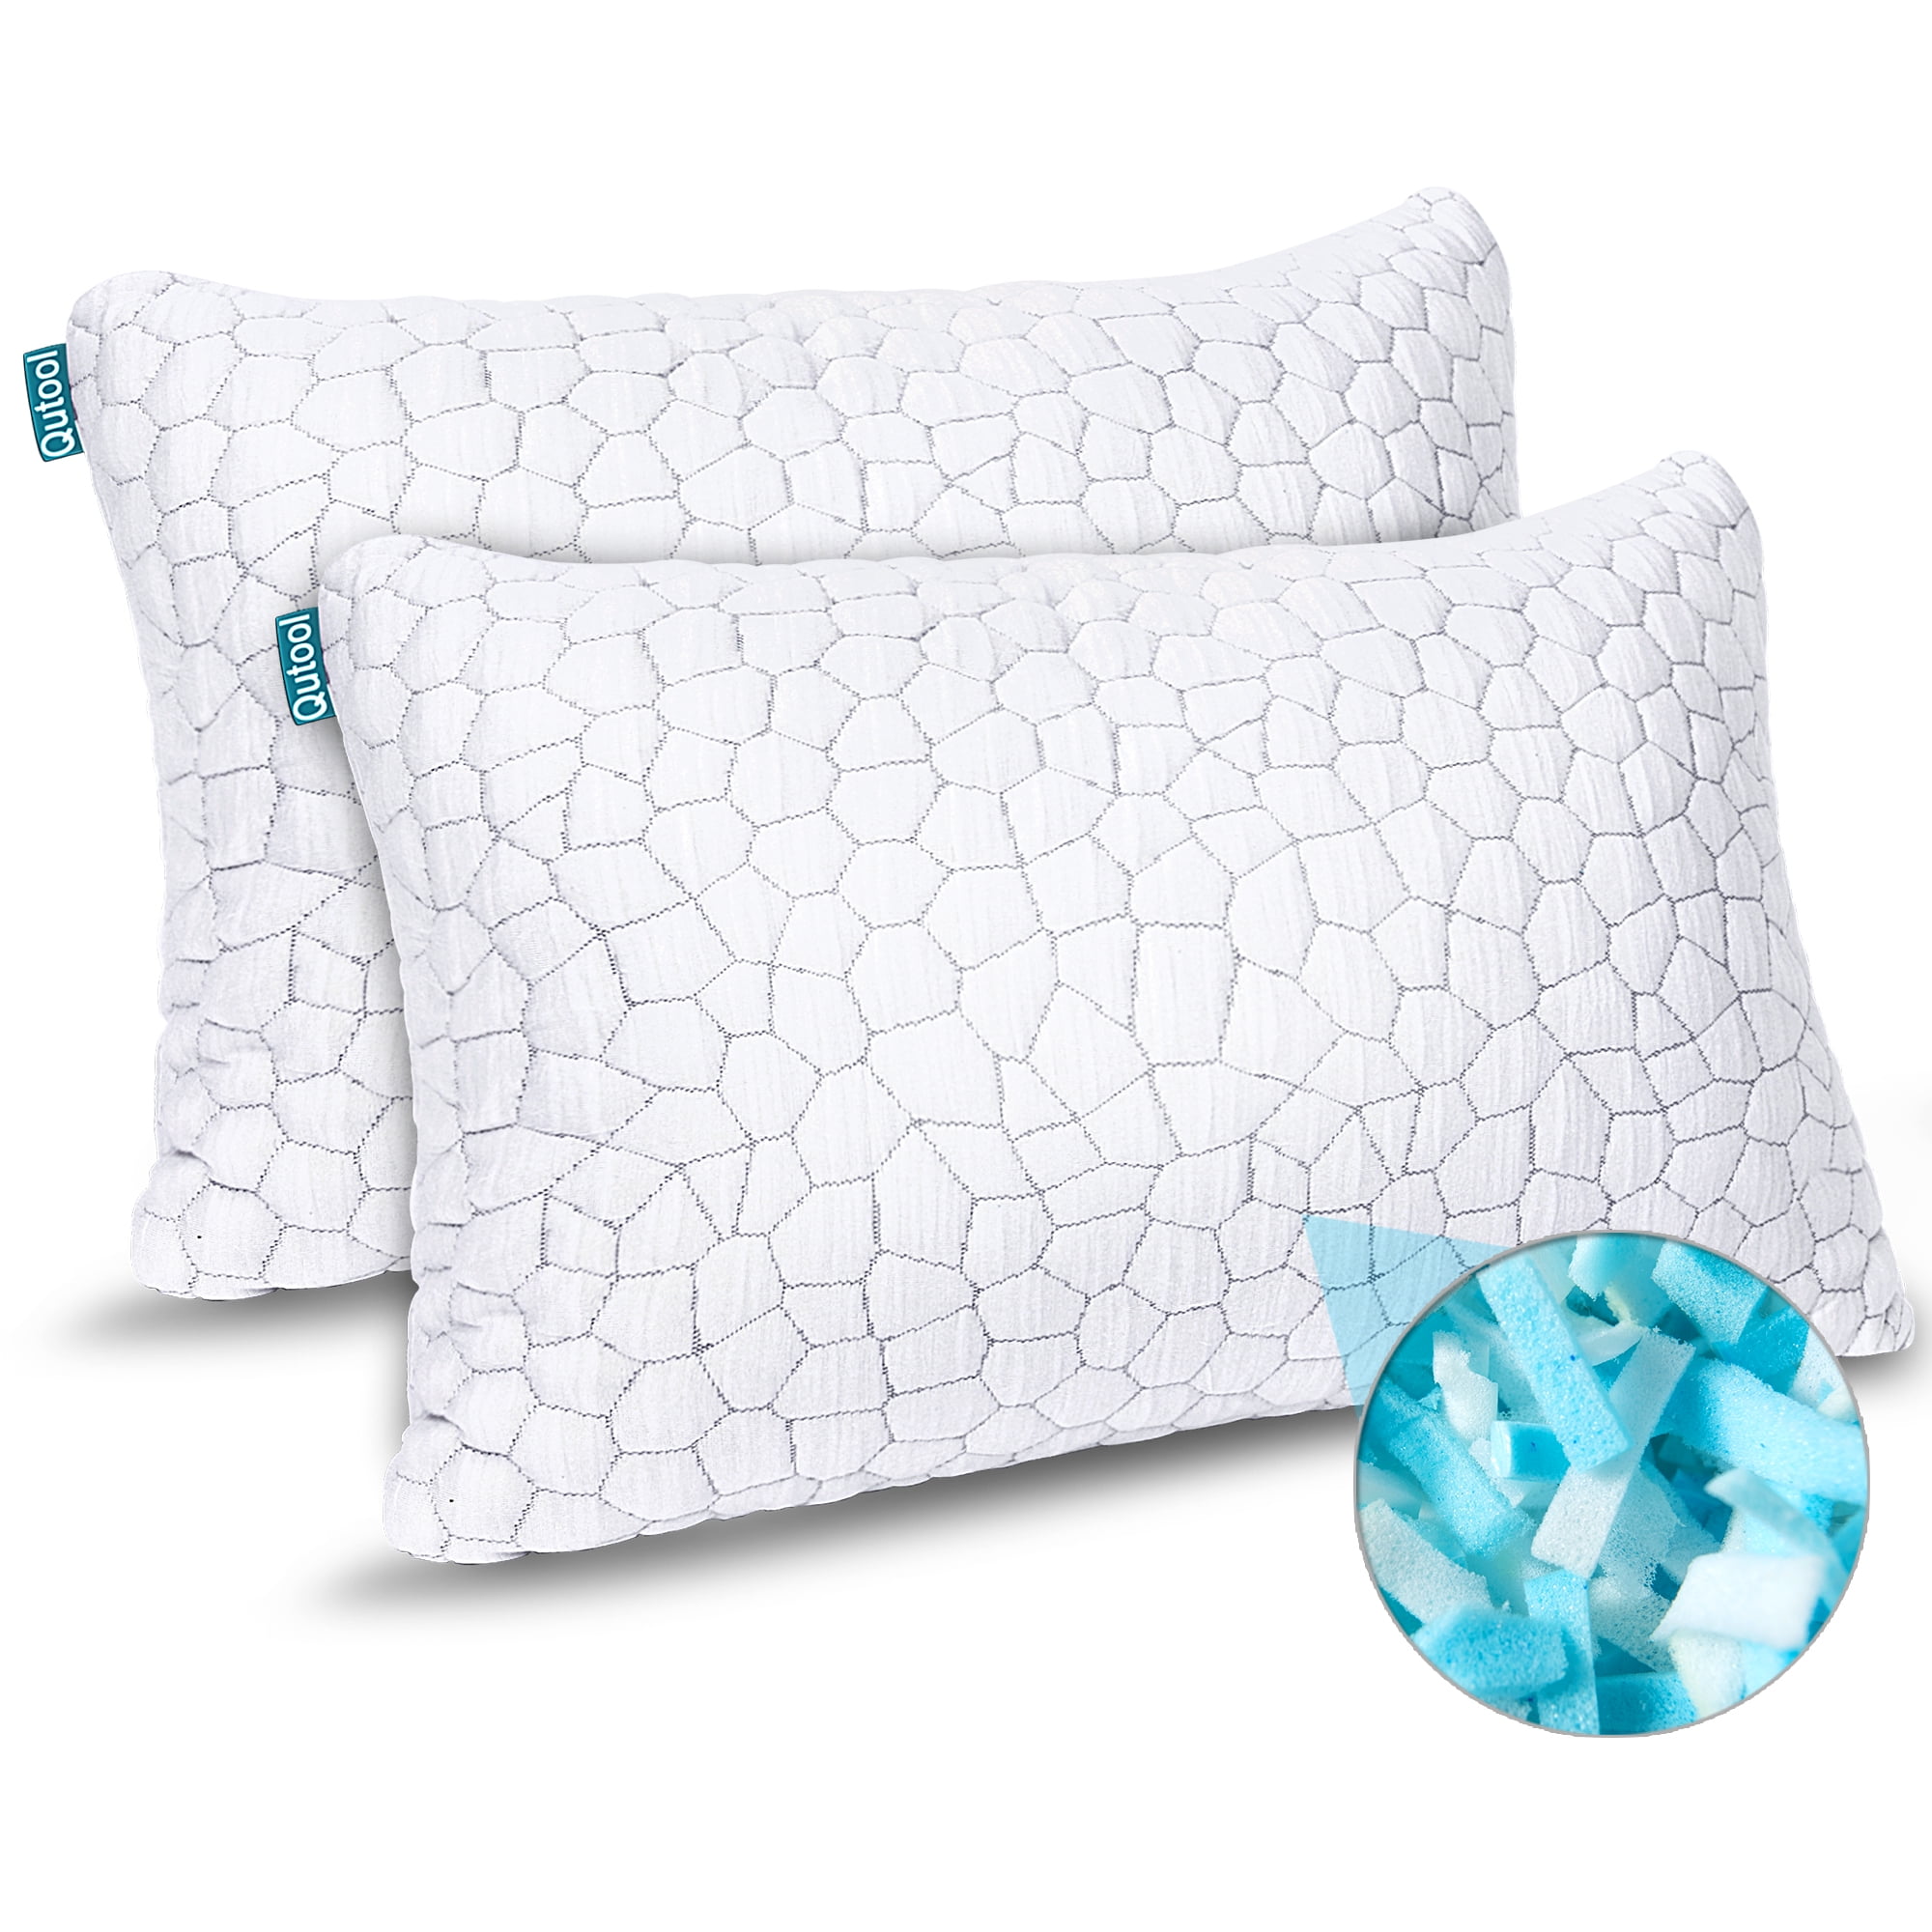 Qutool Bed Pillow Bamboo Shredded Memory Foam Cooling Pillow, Washable  Cover, Queen 2 Pack